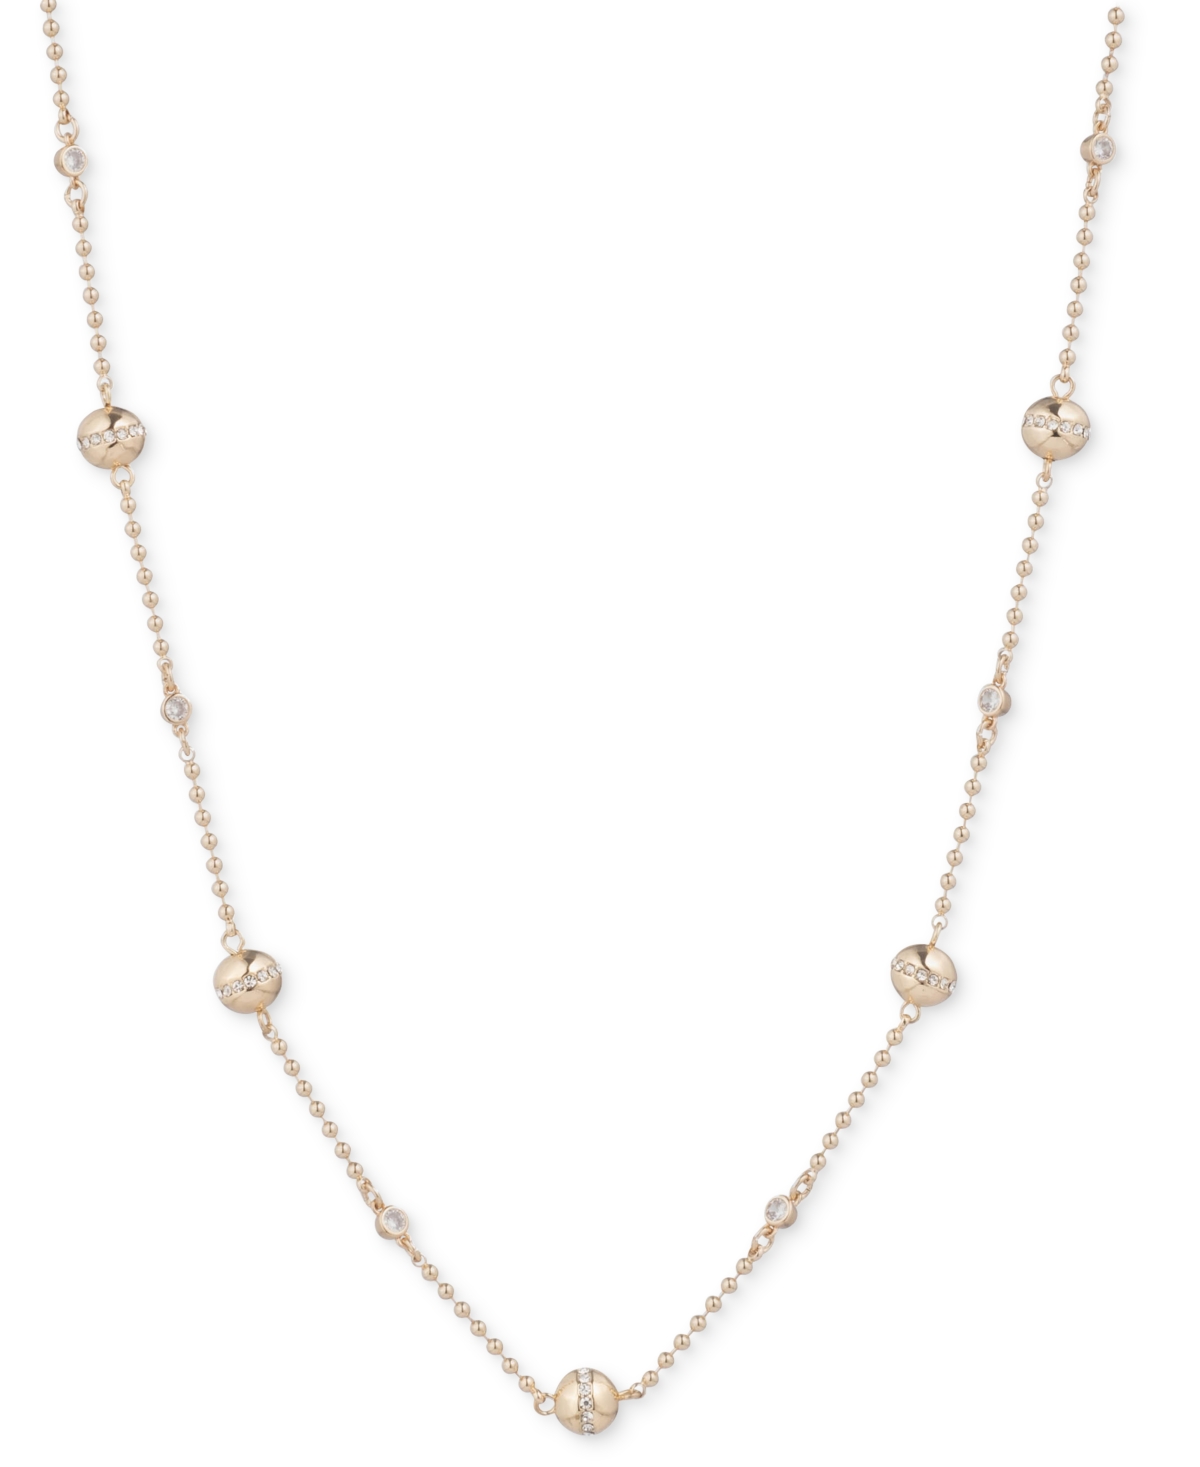 Gold-Tone Pave Bead Station Collar Necklace, 16" + 3" extender - White